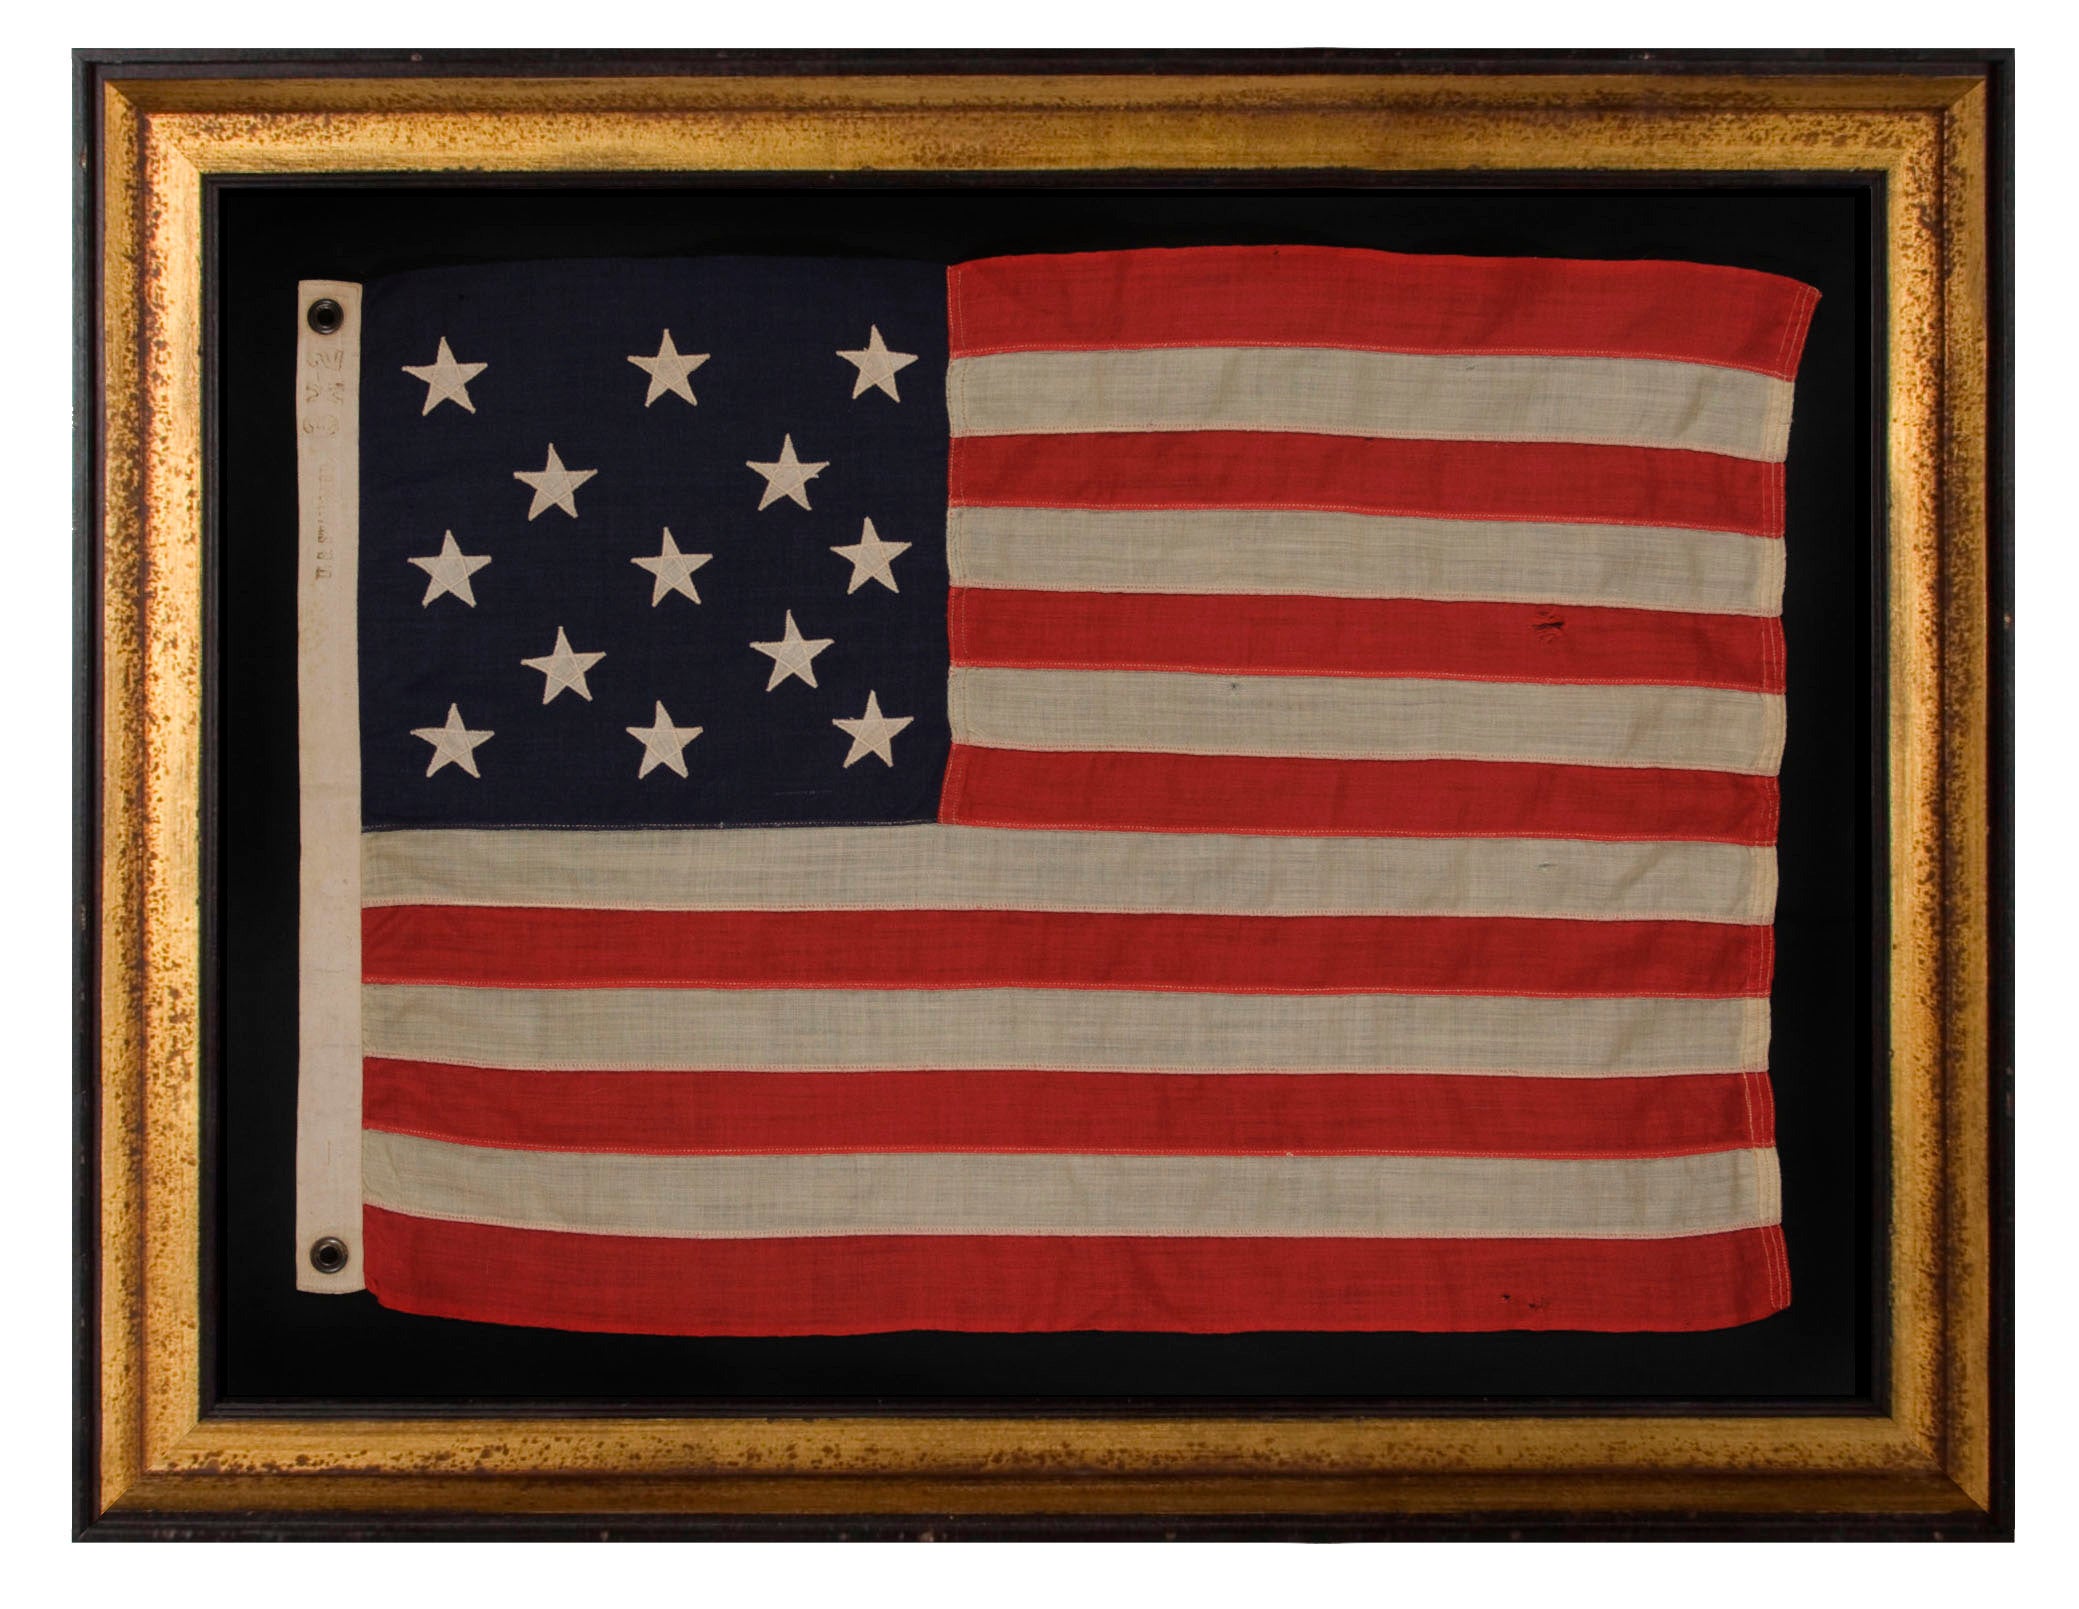 13 Star Antique American Flag with a 3-2-3-2-3 Pattern, 1895-1926